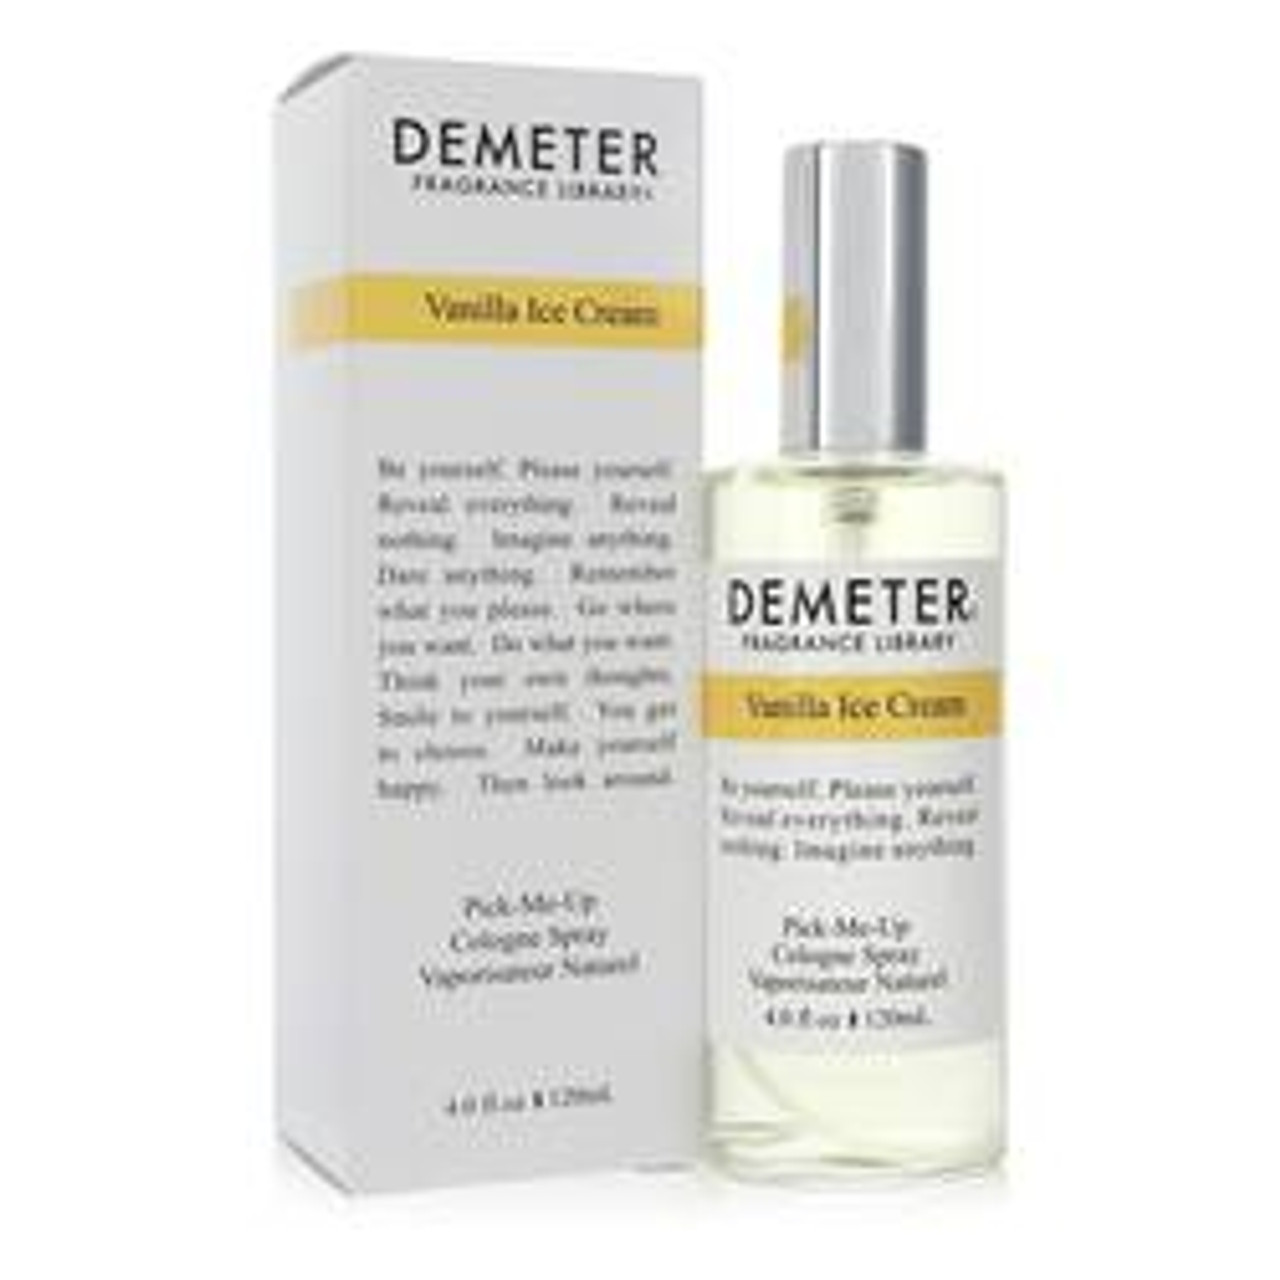 Demeter Vanilla Ice Cream Perfume By Demeter Cologne Spray 4 oz for Women - [From 79.50 - Choose pk Qty ] - *Ships from Miami